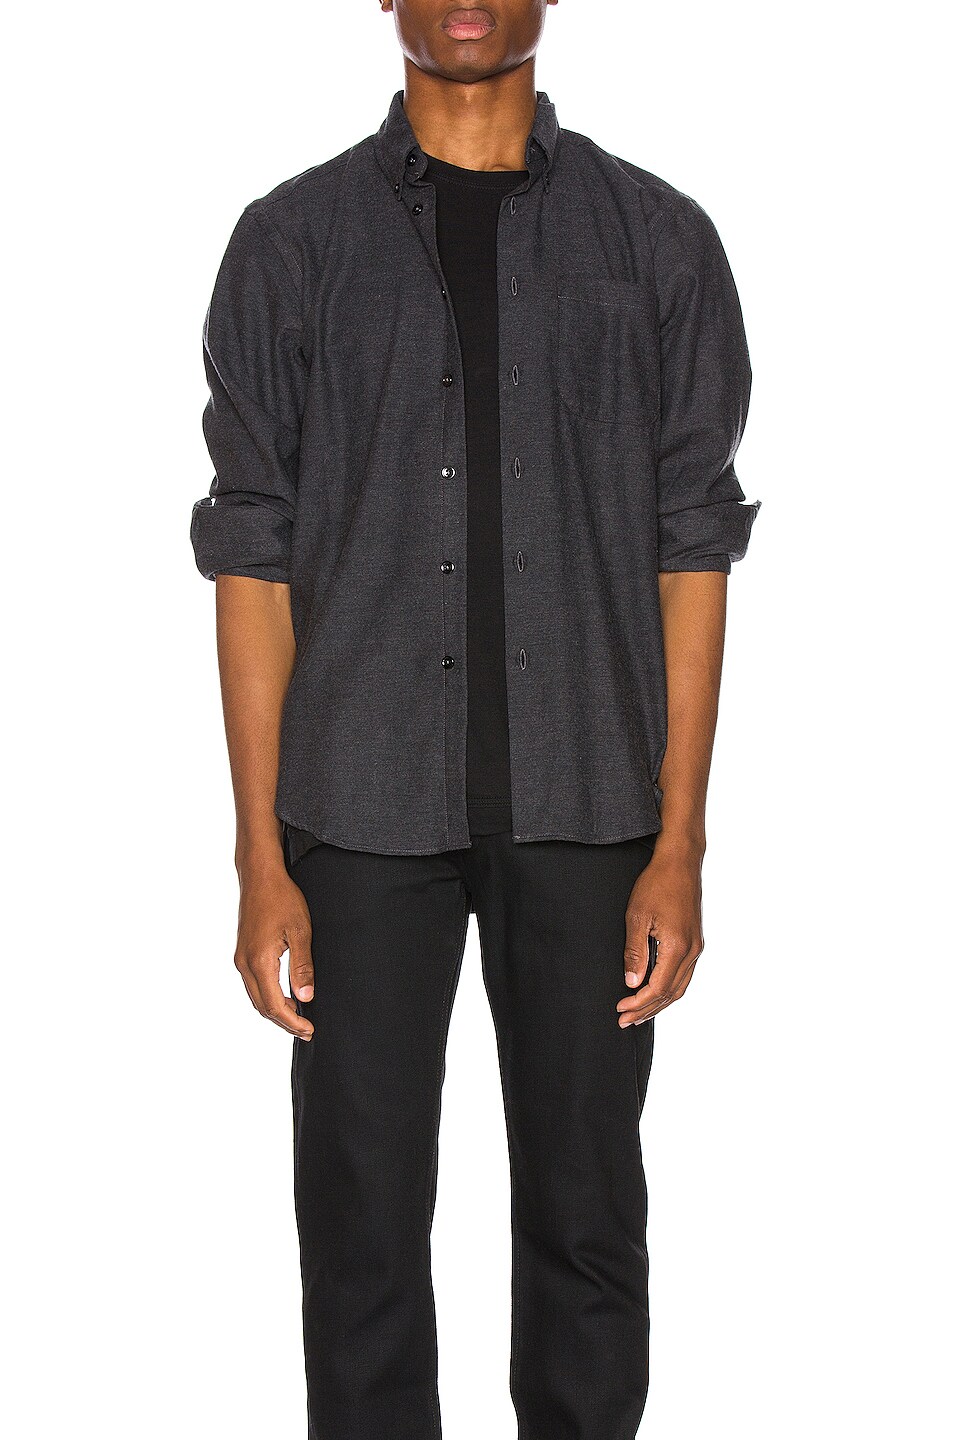 Image 1 of Naked & Famous Denim Easy Shirt in Charcoal Classic Flannel